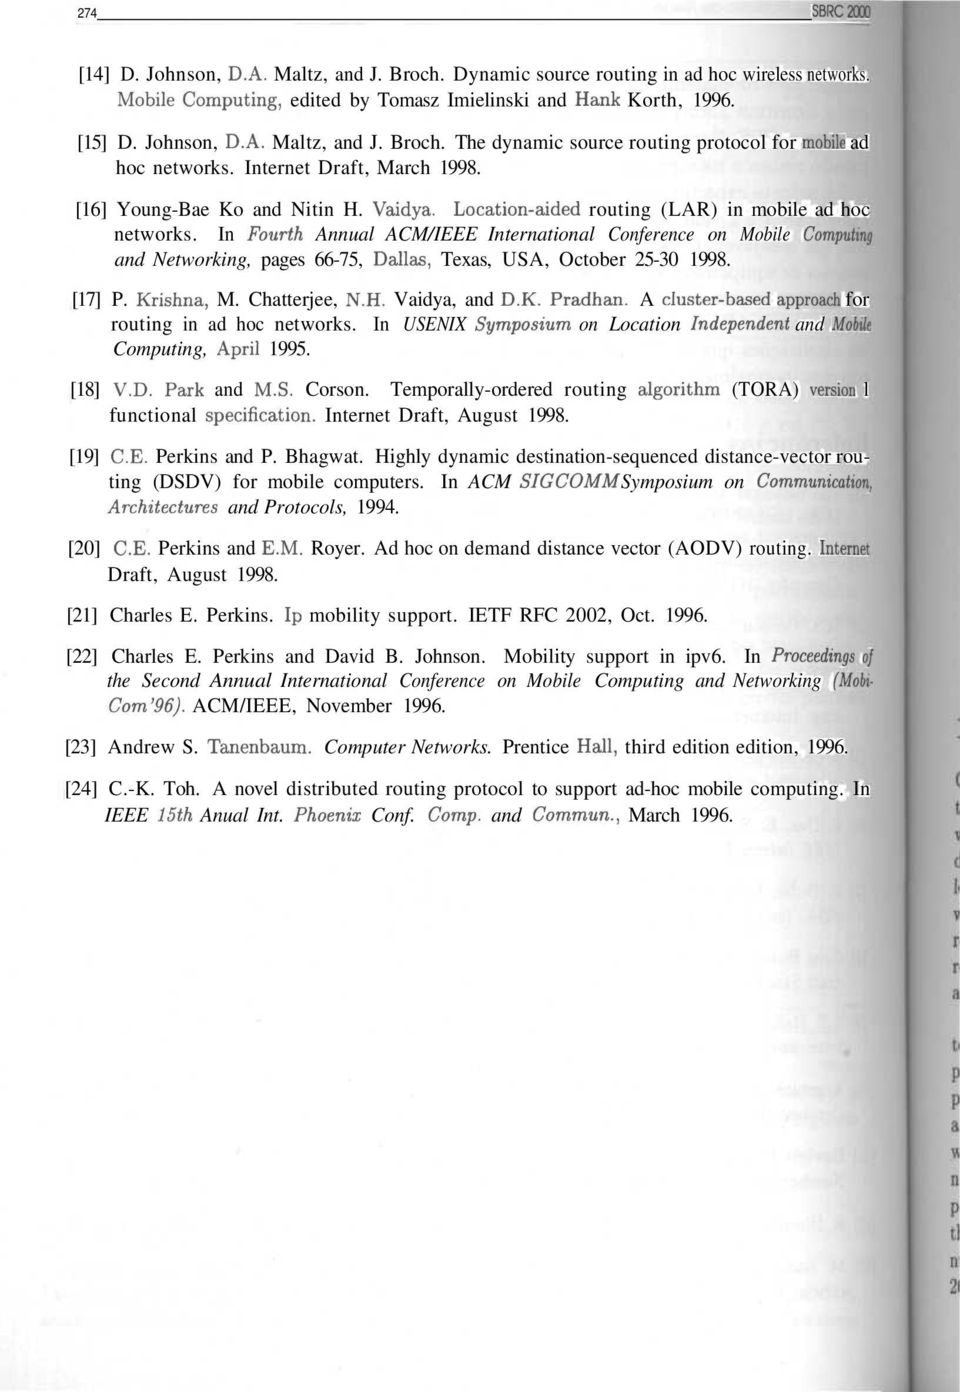 In Fourth Annual ACM/IEEE International Conference on Mobile Comptiíinj and Networking, pages 66-75, Dallas, Texas, USA, October 25-30 1998. [17] P. Krishna, M. Chatterjee, N.H. Vaidya, and D.K. Pradhan.